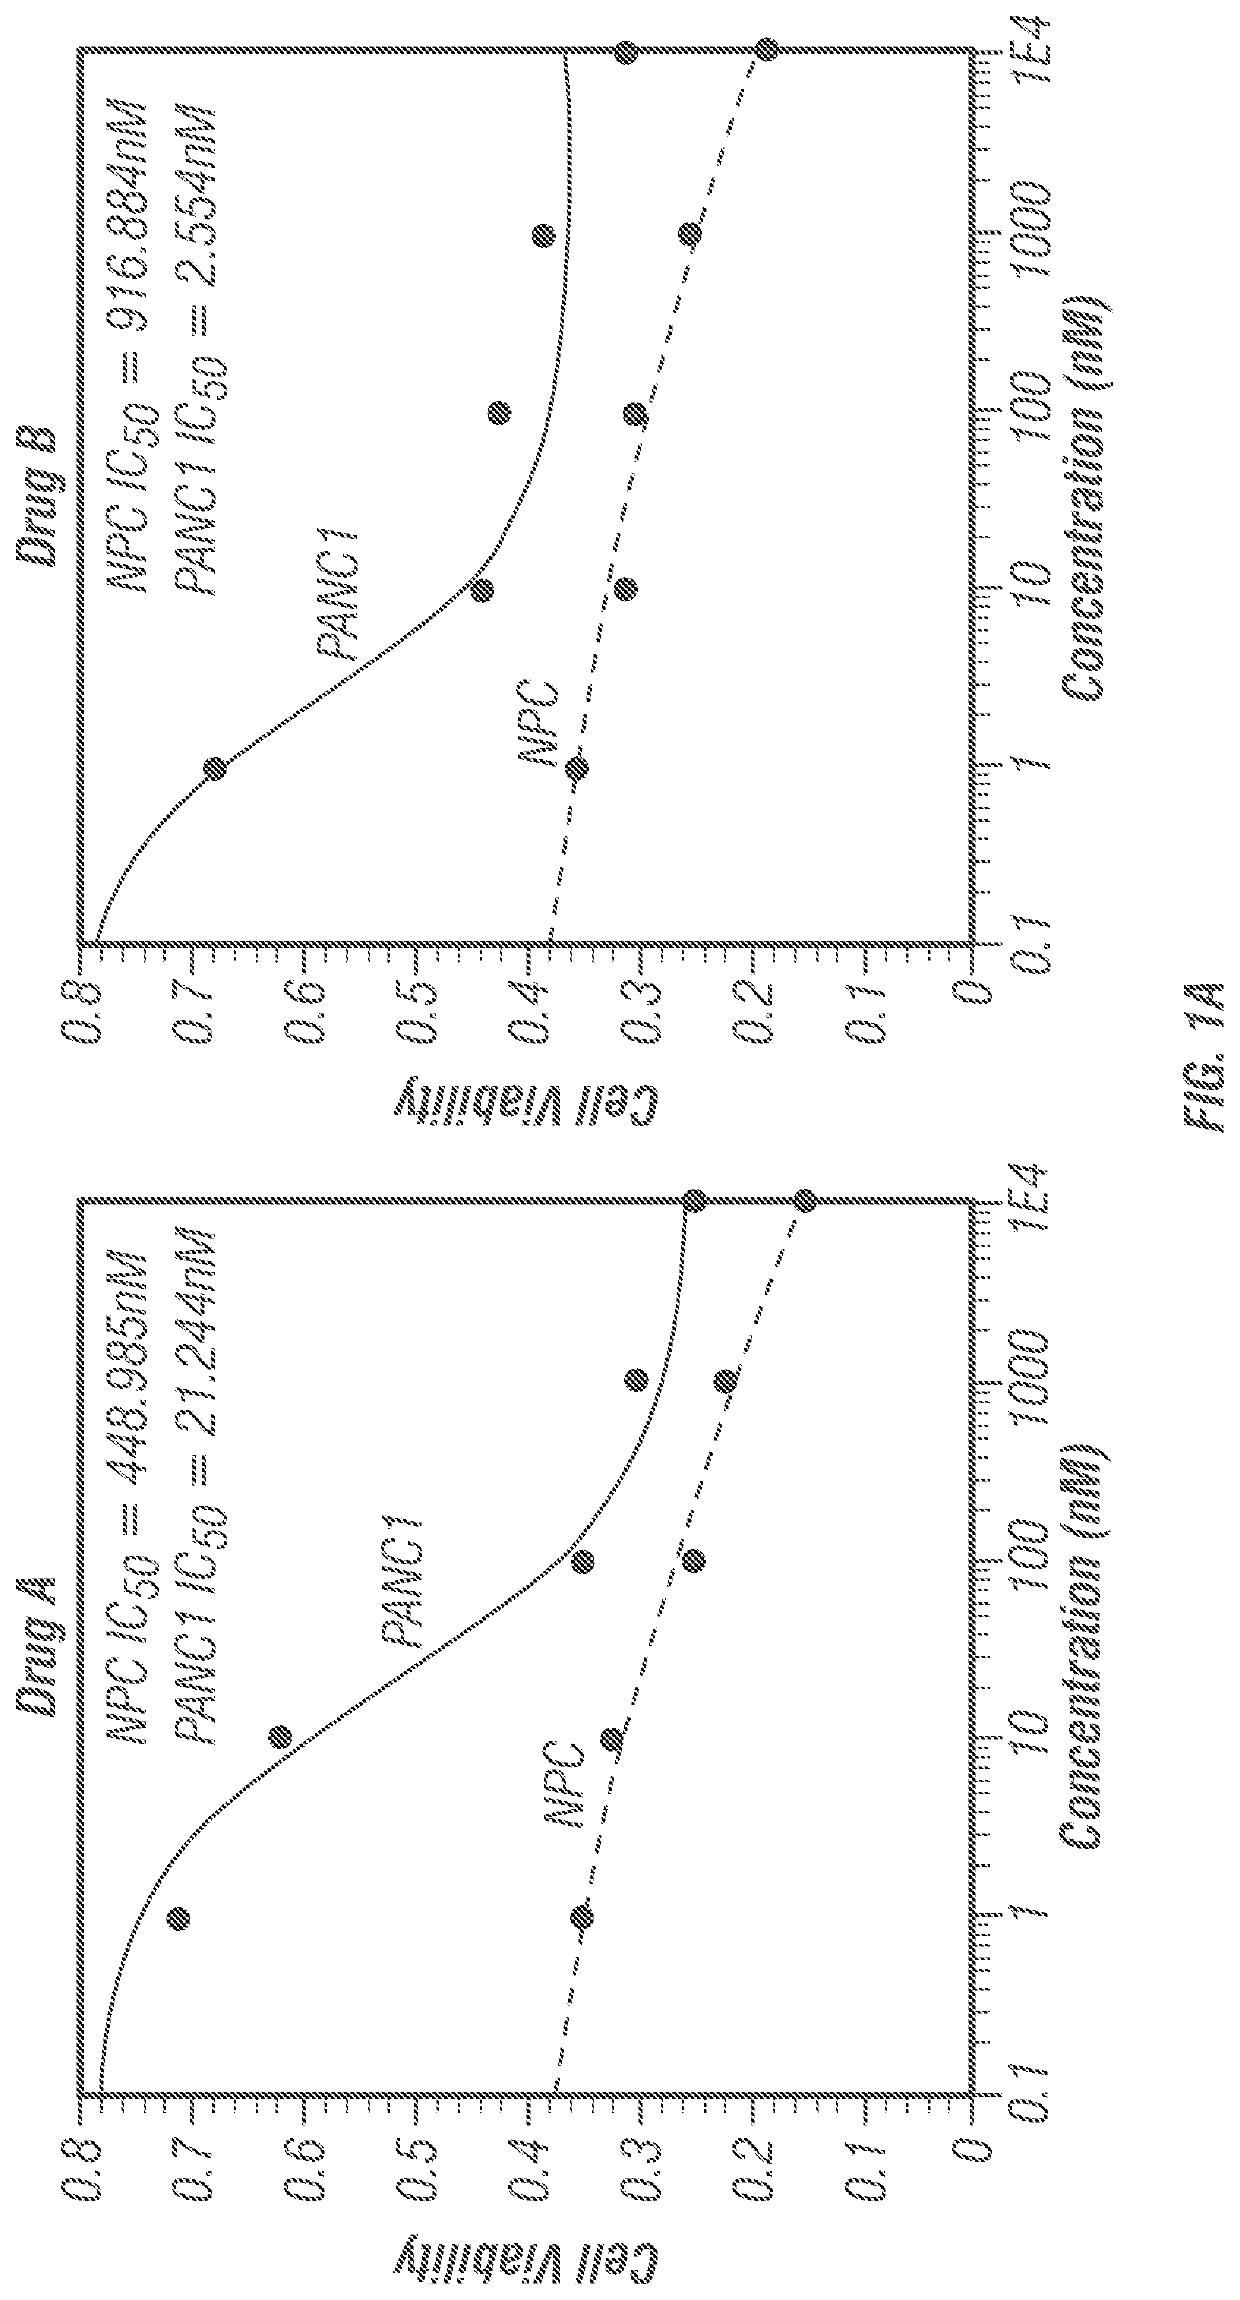 Substituted pyridinyl azetidinone derivatives for use in treating cancer and other diseases